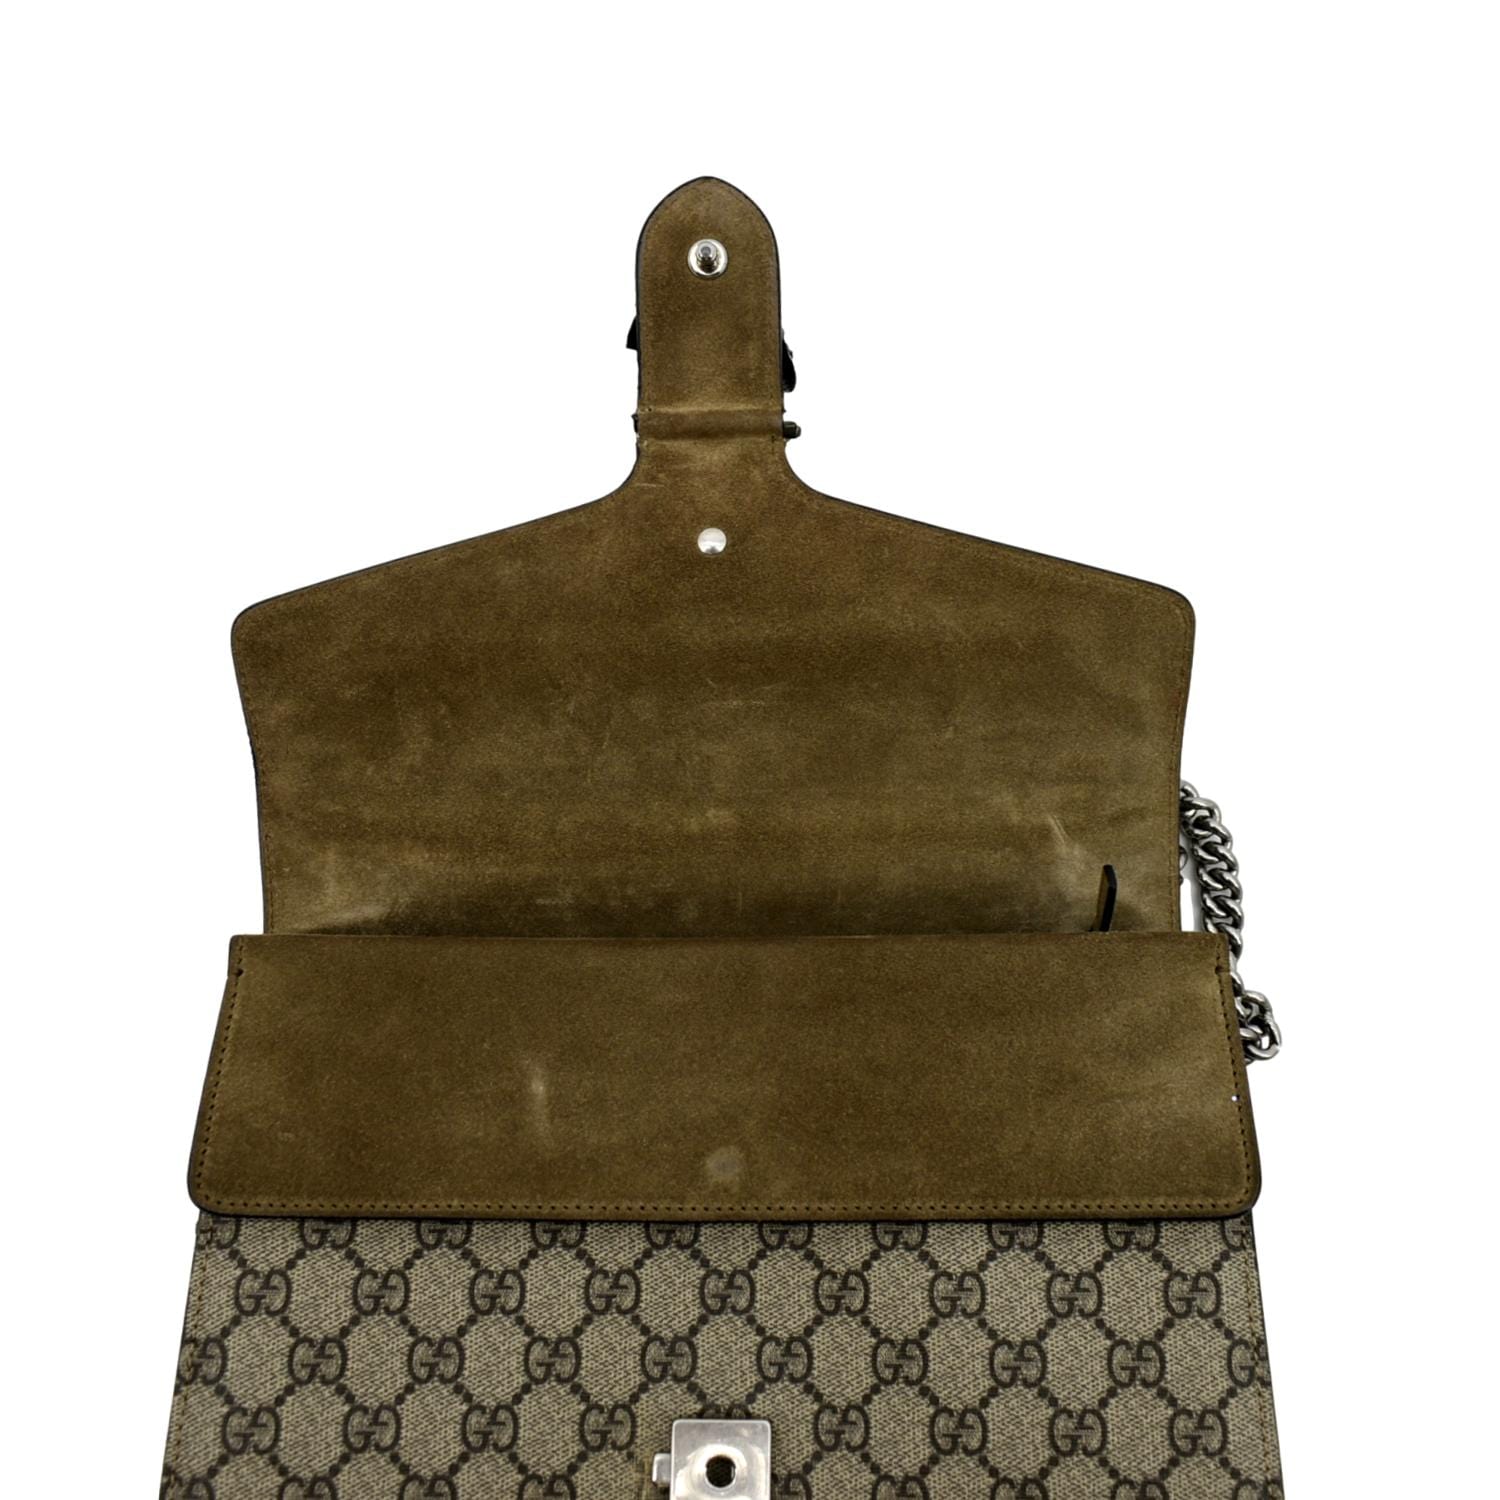 Gucci Dionysus Shoulder Bag GG Supreme Small Beige/Red in Coated